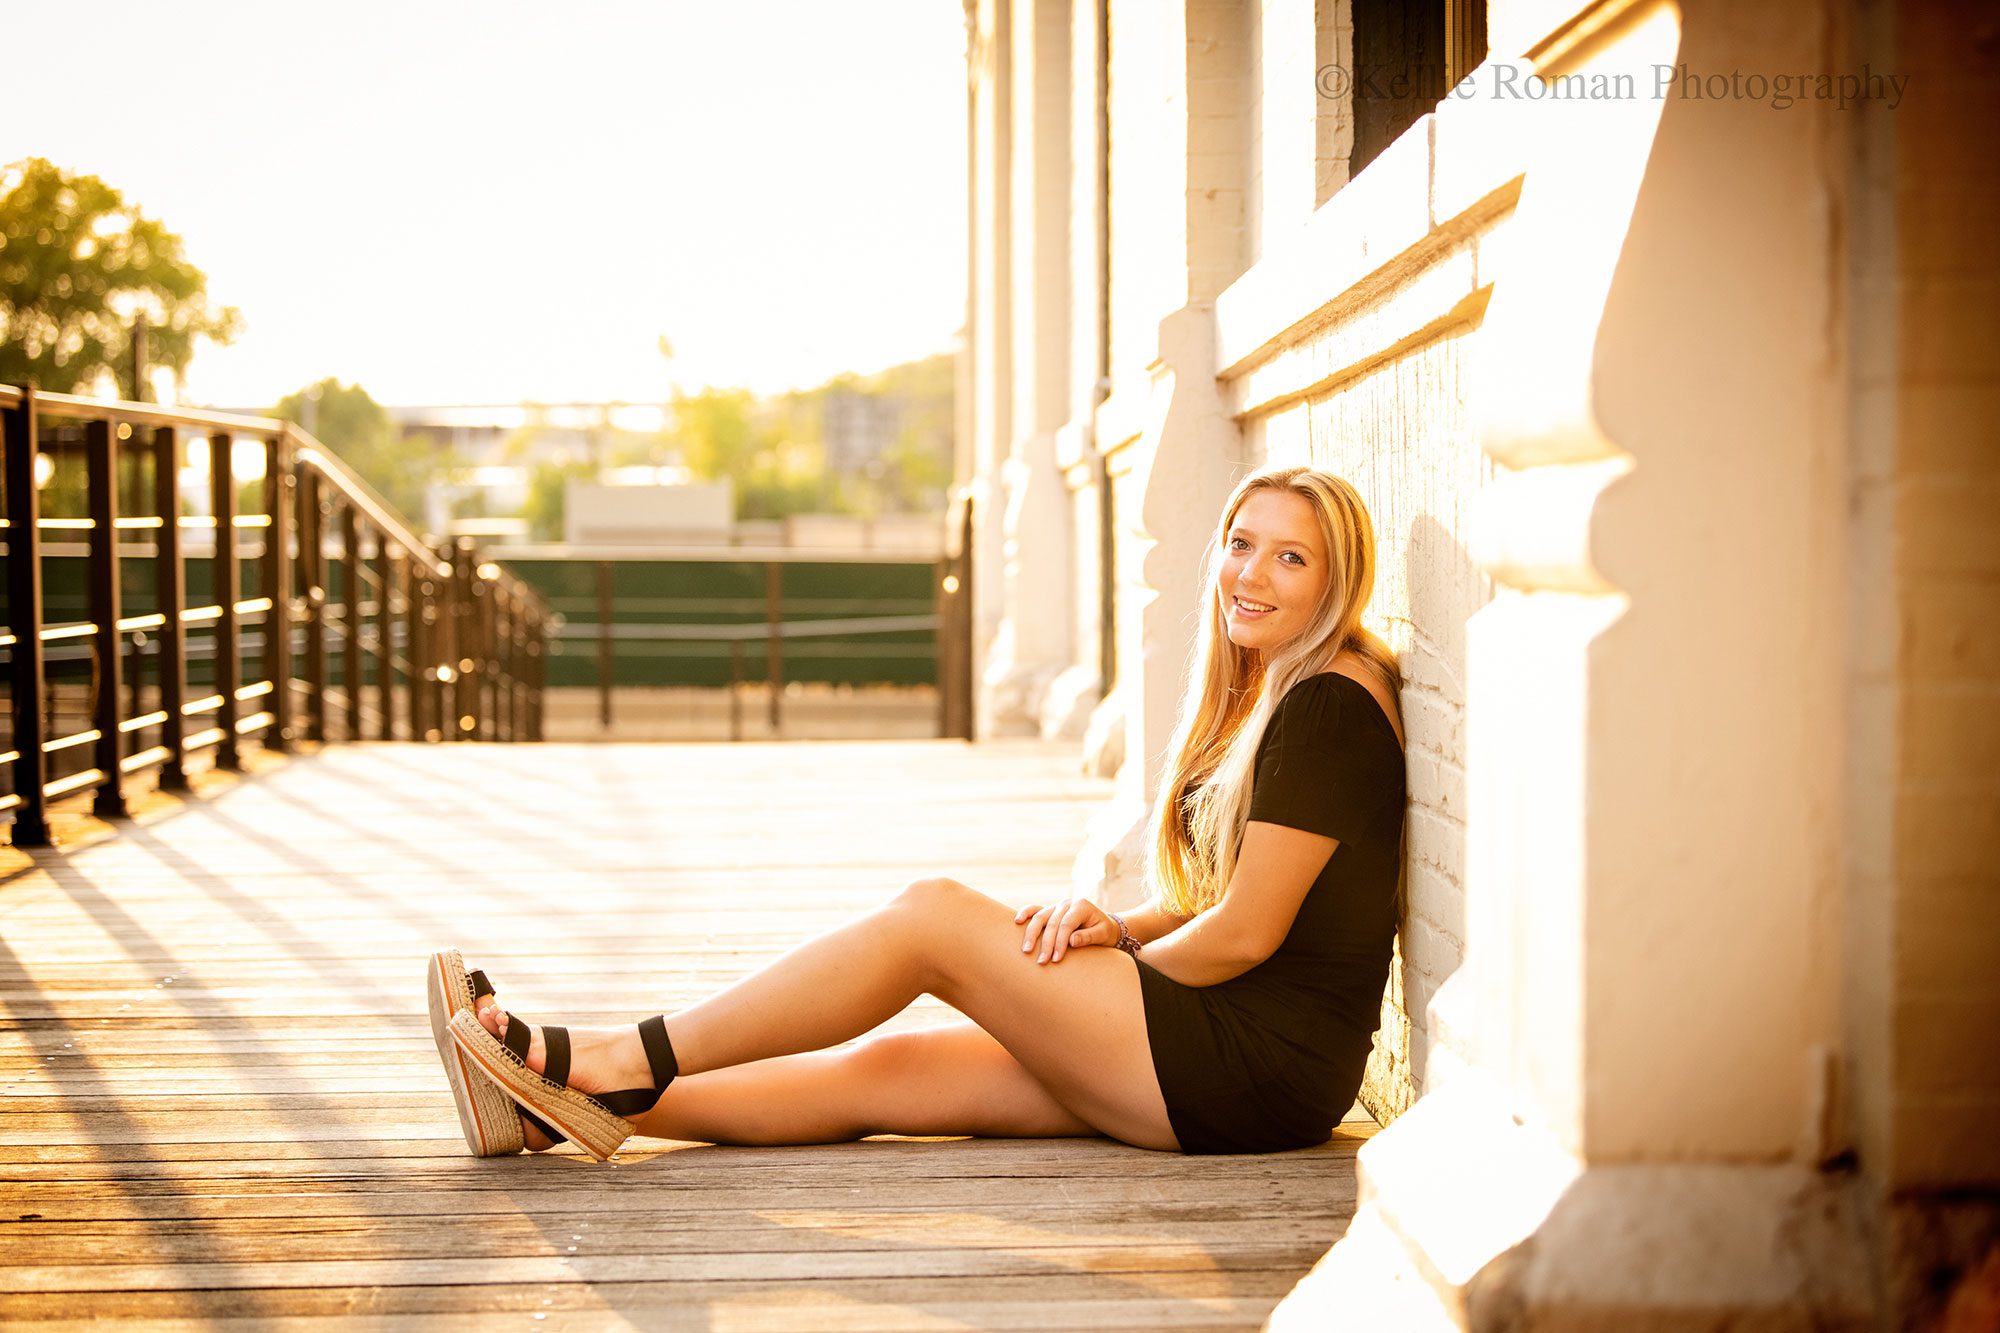 milwaukee senior photographer. high school senior girl sitting on wood walkway resting her back against cream brick building. girl has long blonde hair and is wearing a short black dress with black sandals.